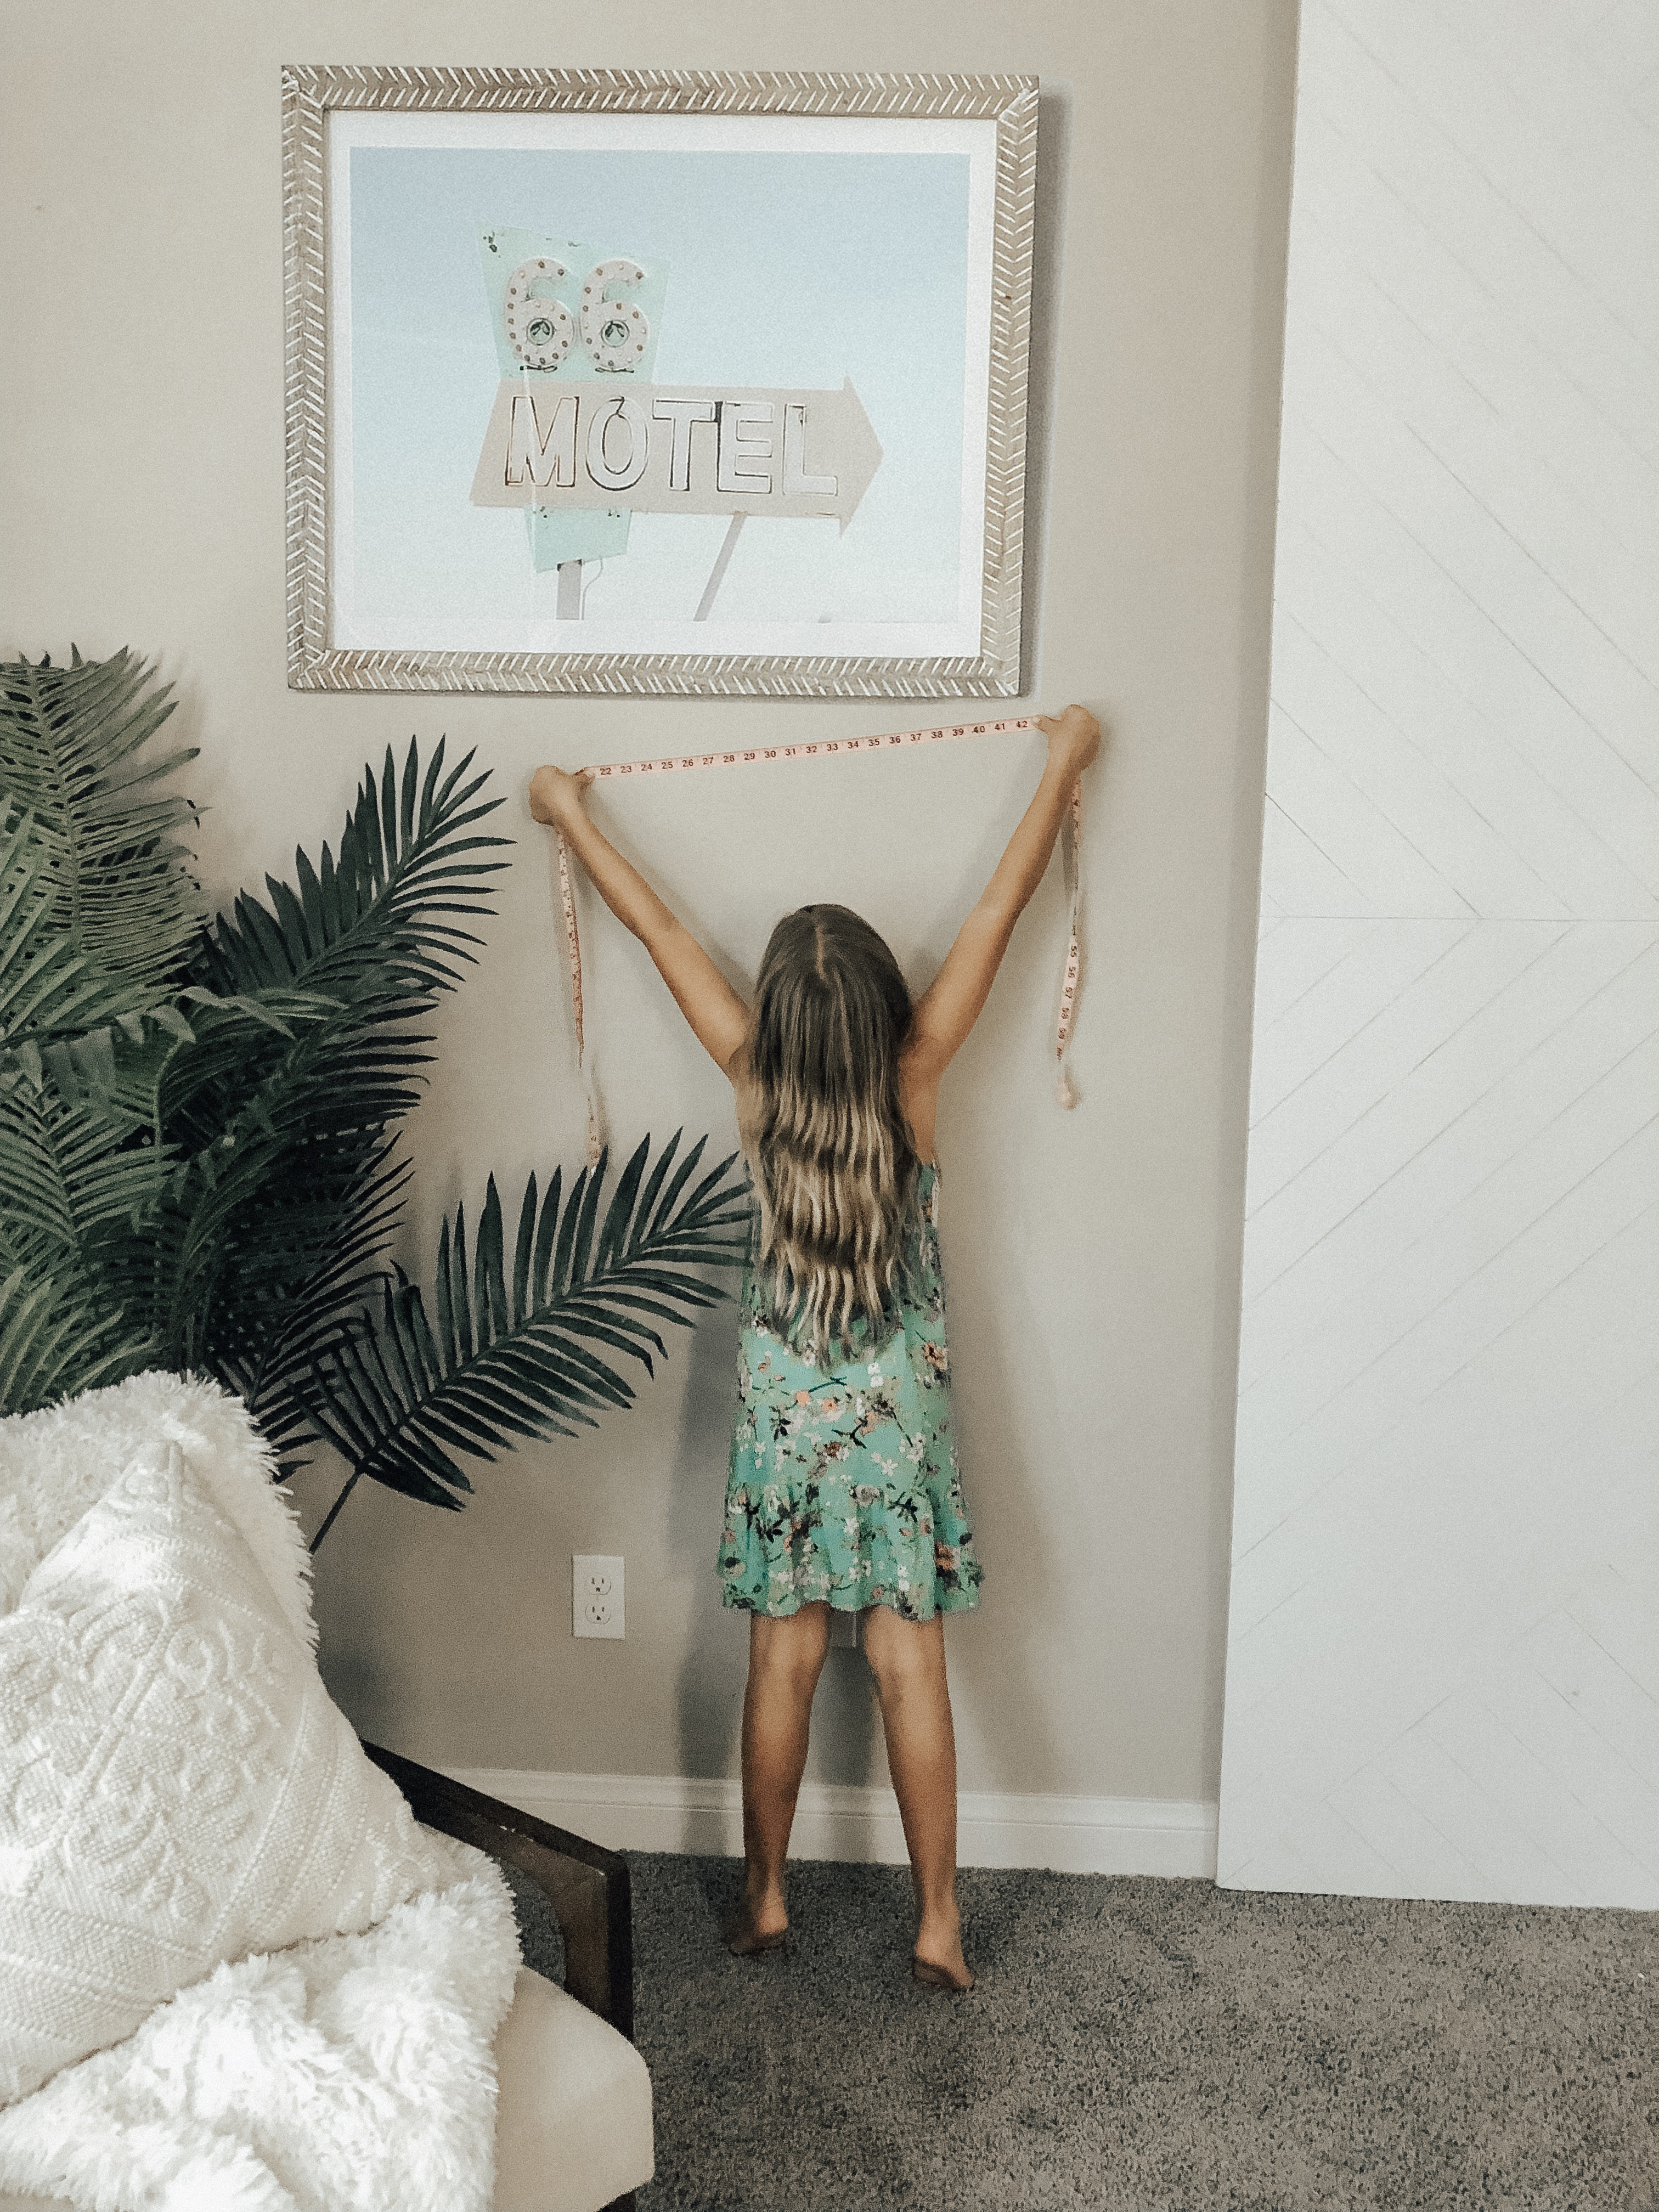 STYLING MY HOME WITH MINTED ART- Jaclyn De Leon Style + Minted art + stylng the home + home decor + wall art + home inspiration + guide to updating your art + art collector + retro style art + interior design + having fun with kids + decorating with kids